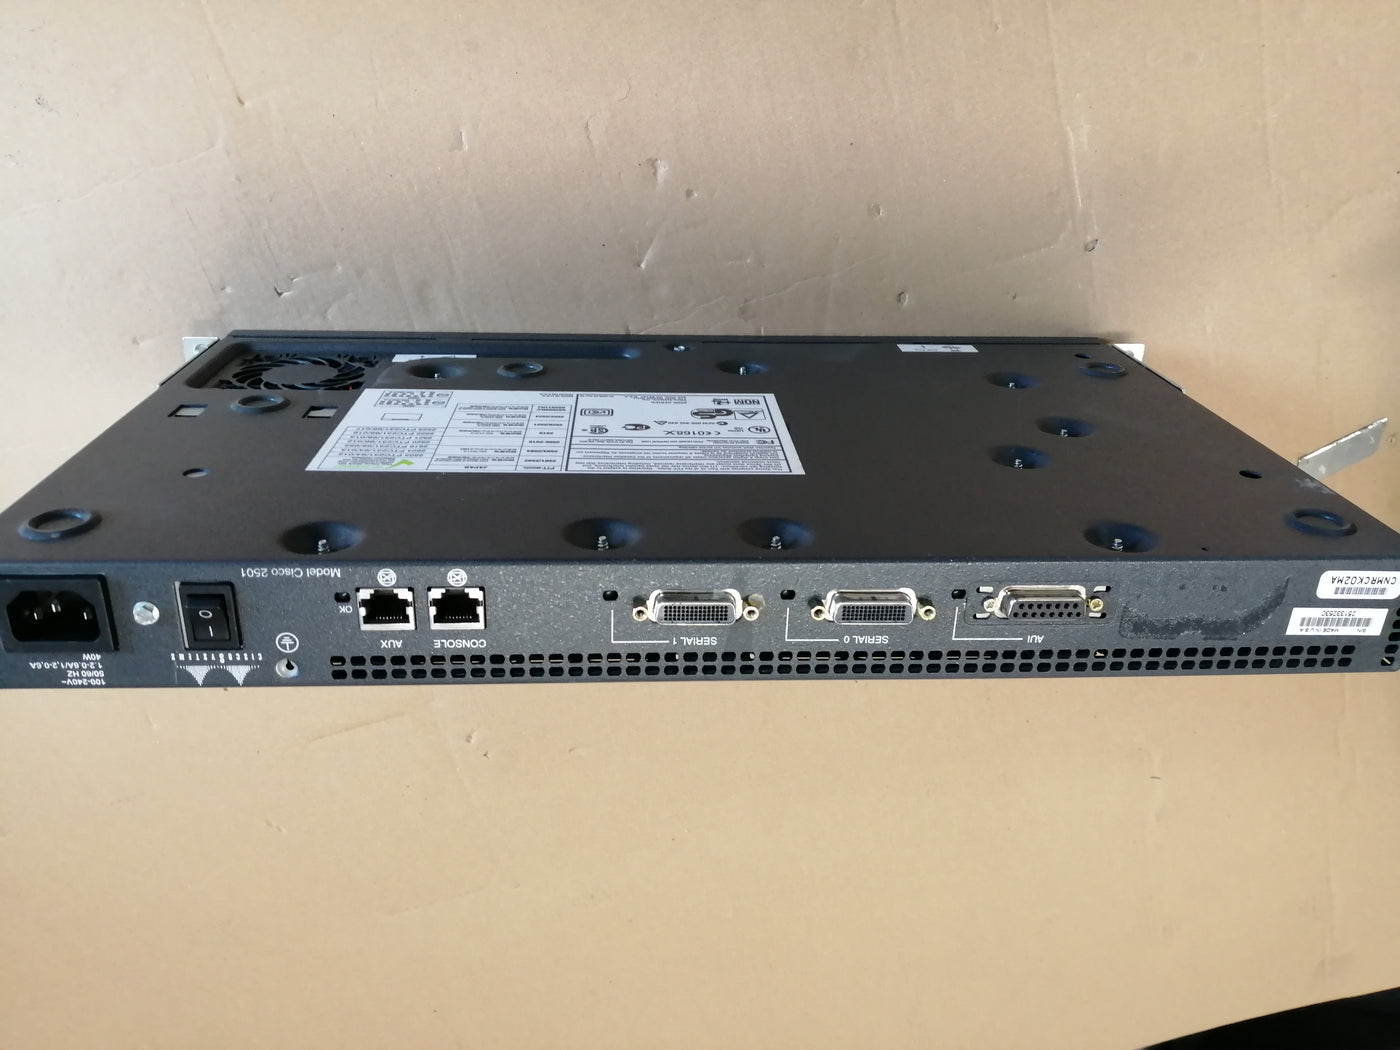 CISCO SYSTEMS 2500 SERIES ETHERNET ROUTER (2501 USED)